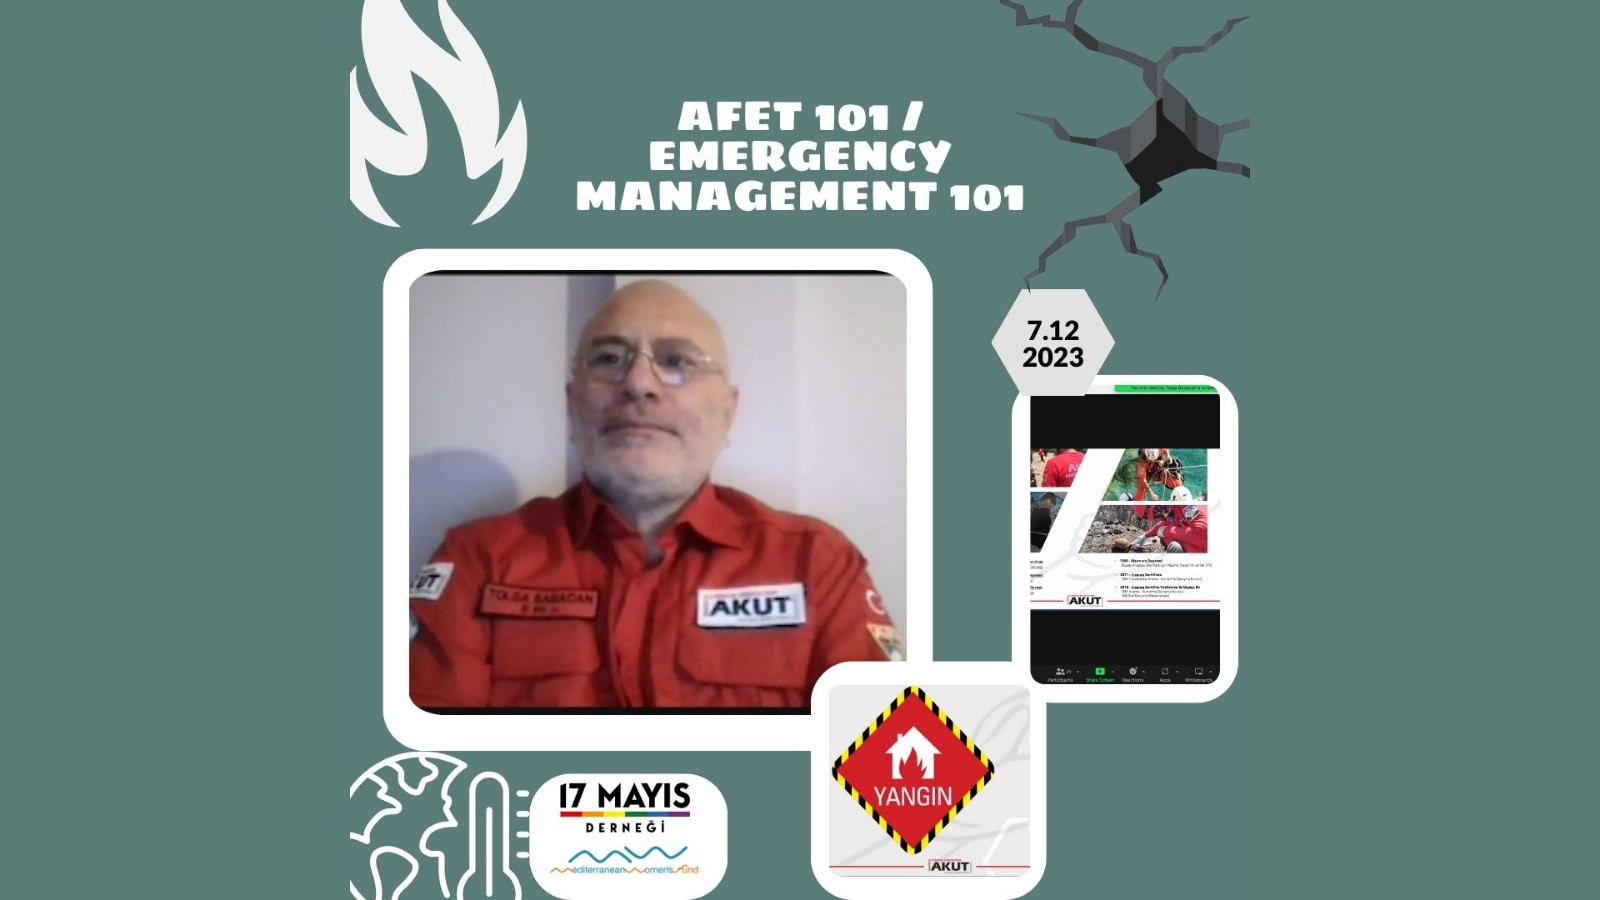 The May 17 Association got the Emergency Management101 training by AKUT  - May 17 Association